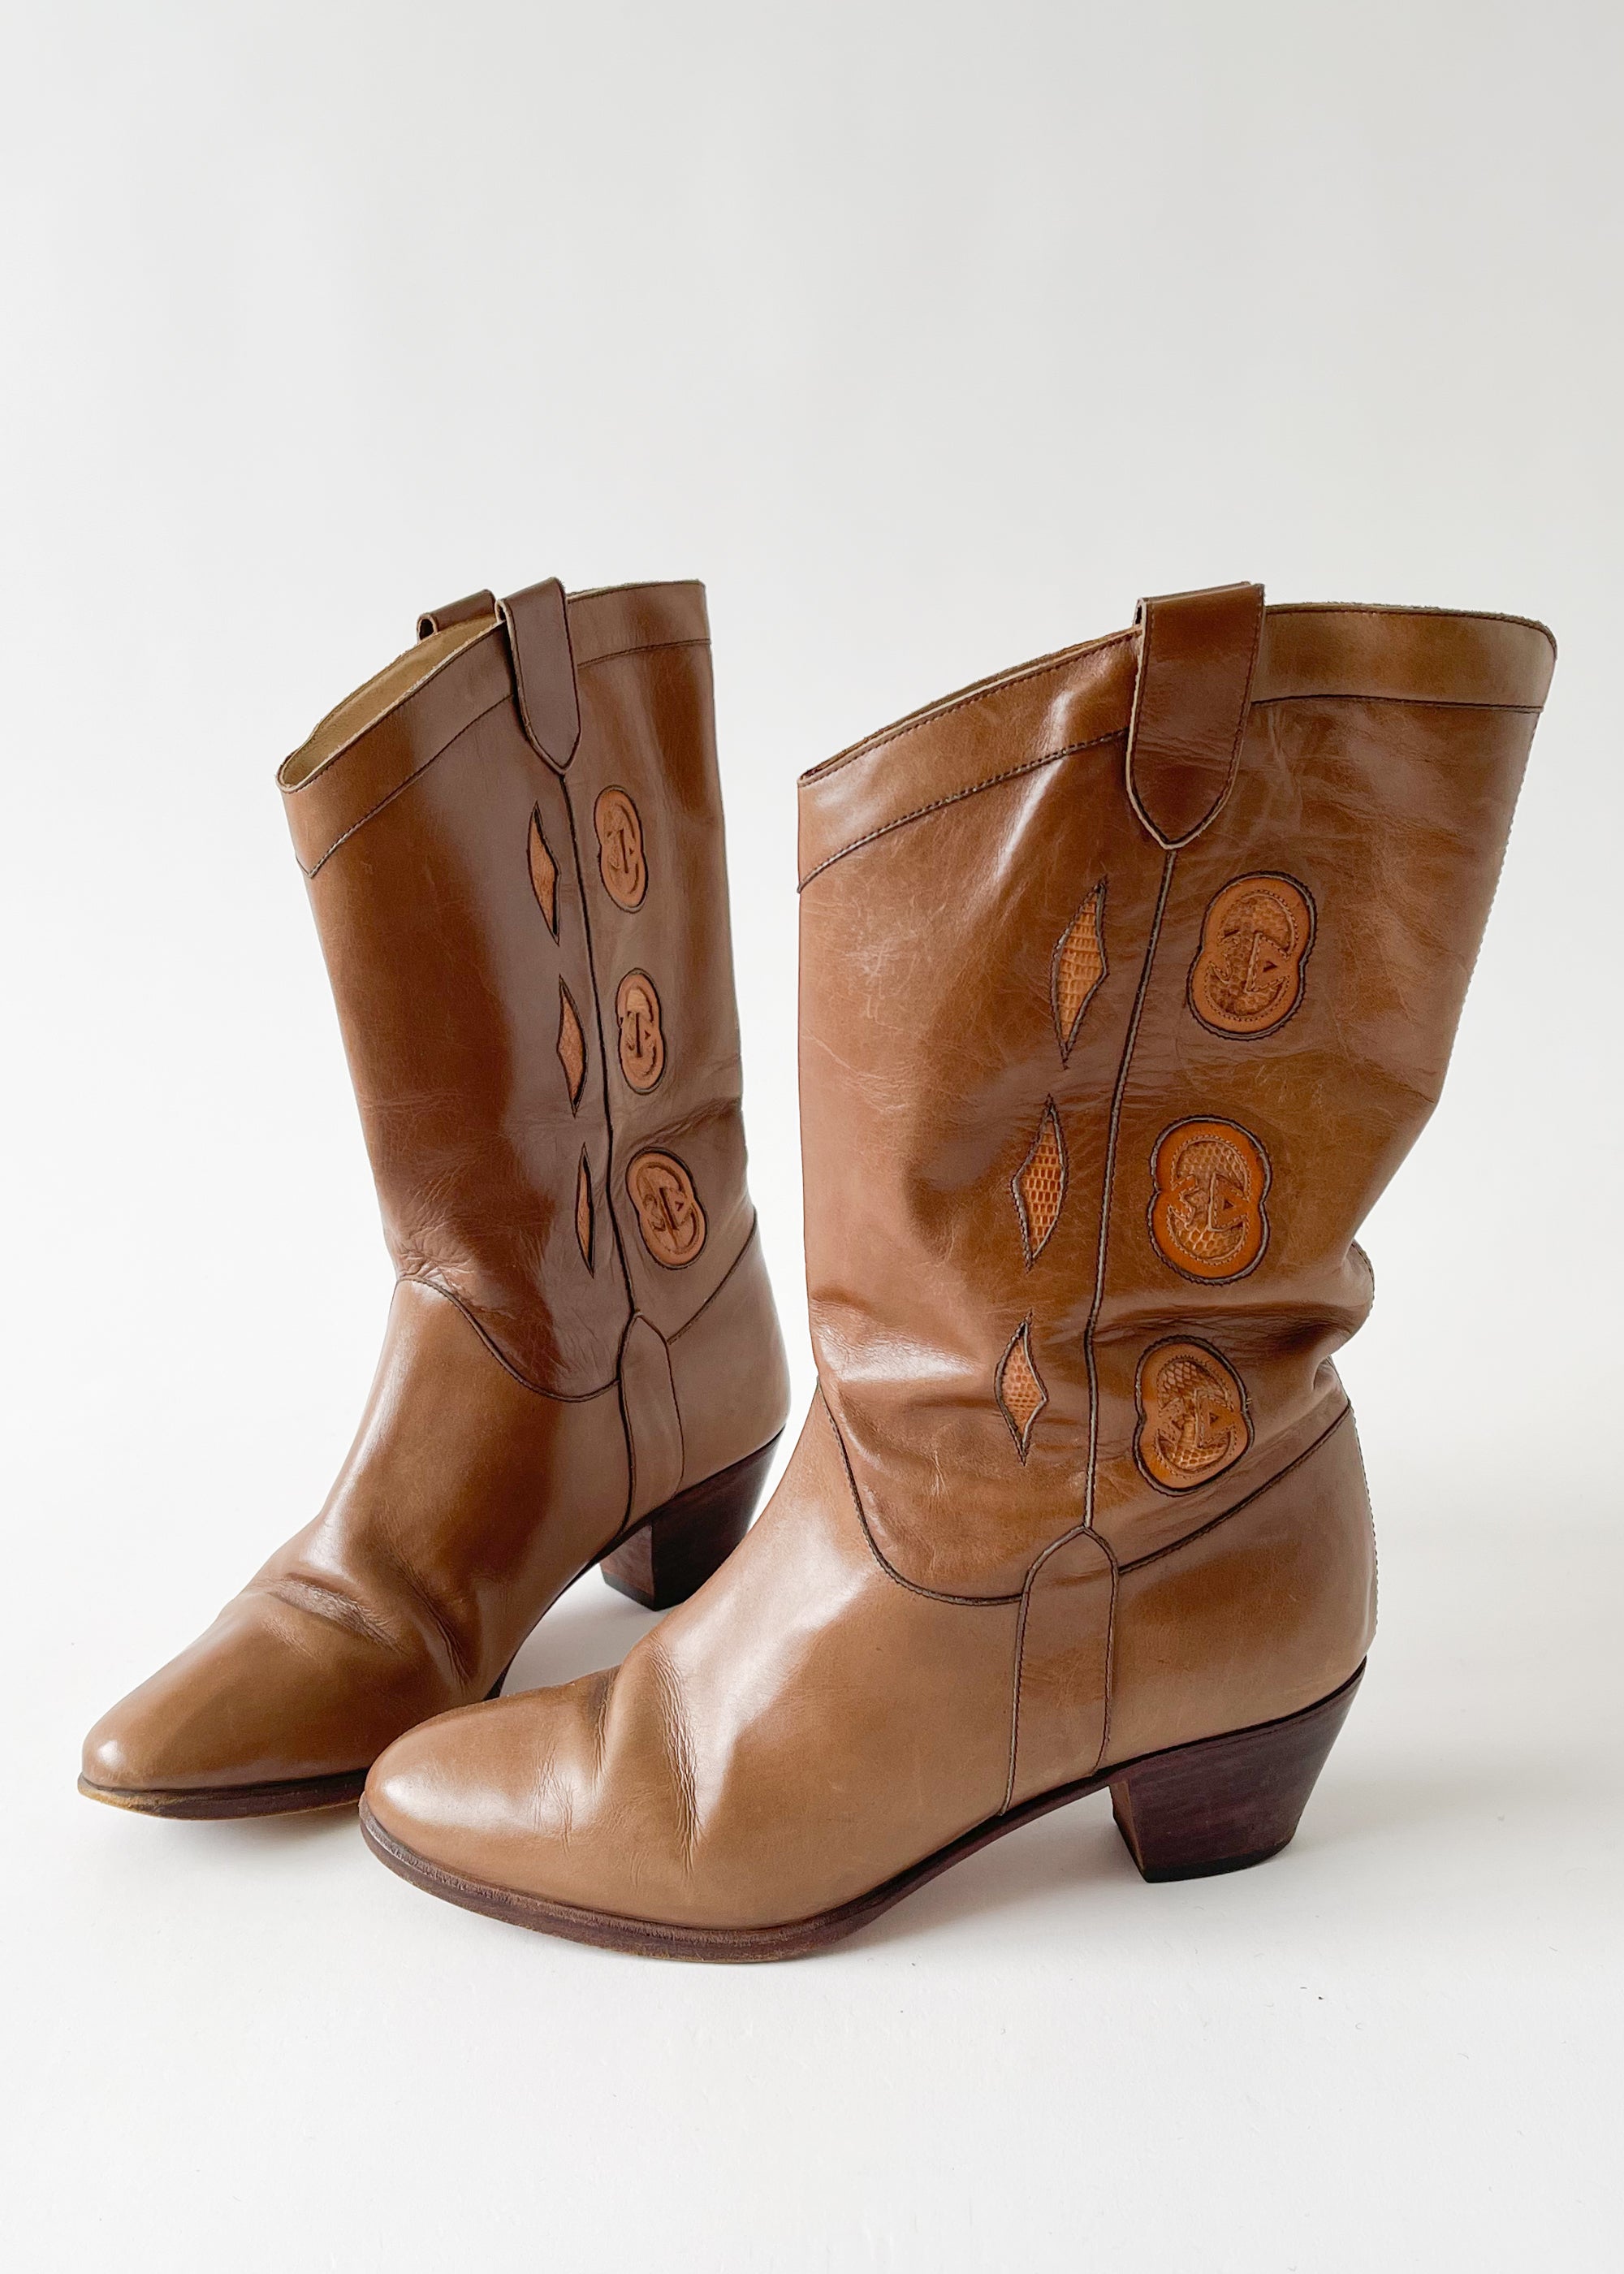 Gucci, Shoes, Iso Gucci Western Cowboy Vintage Boots 37